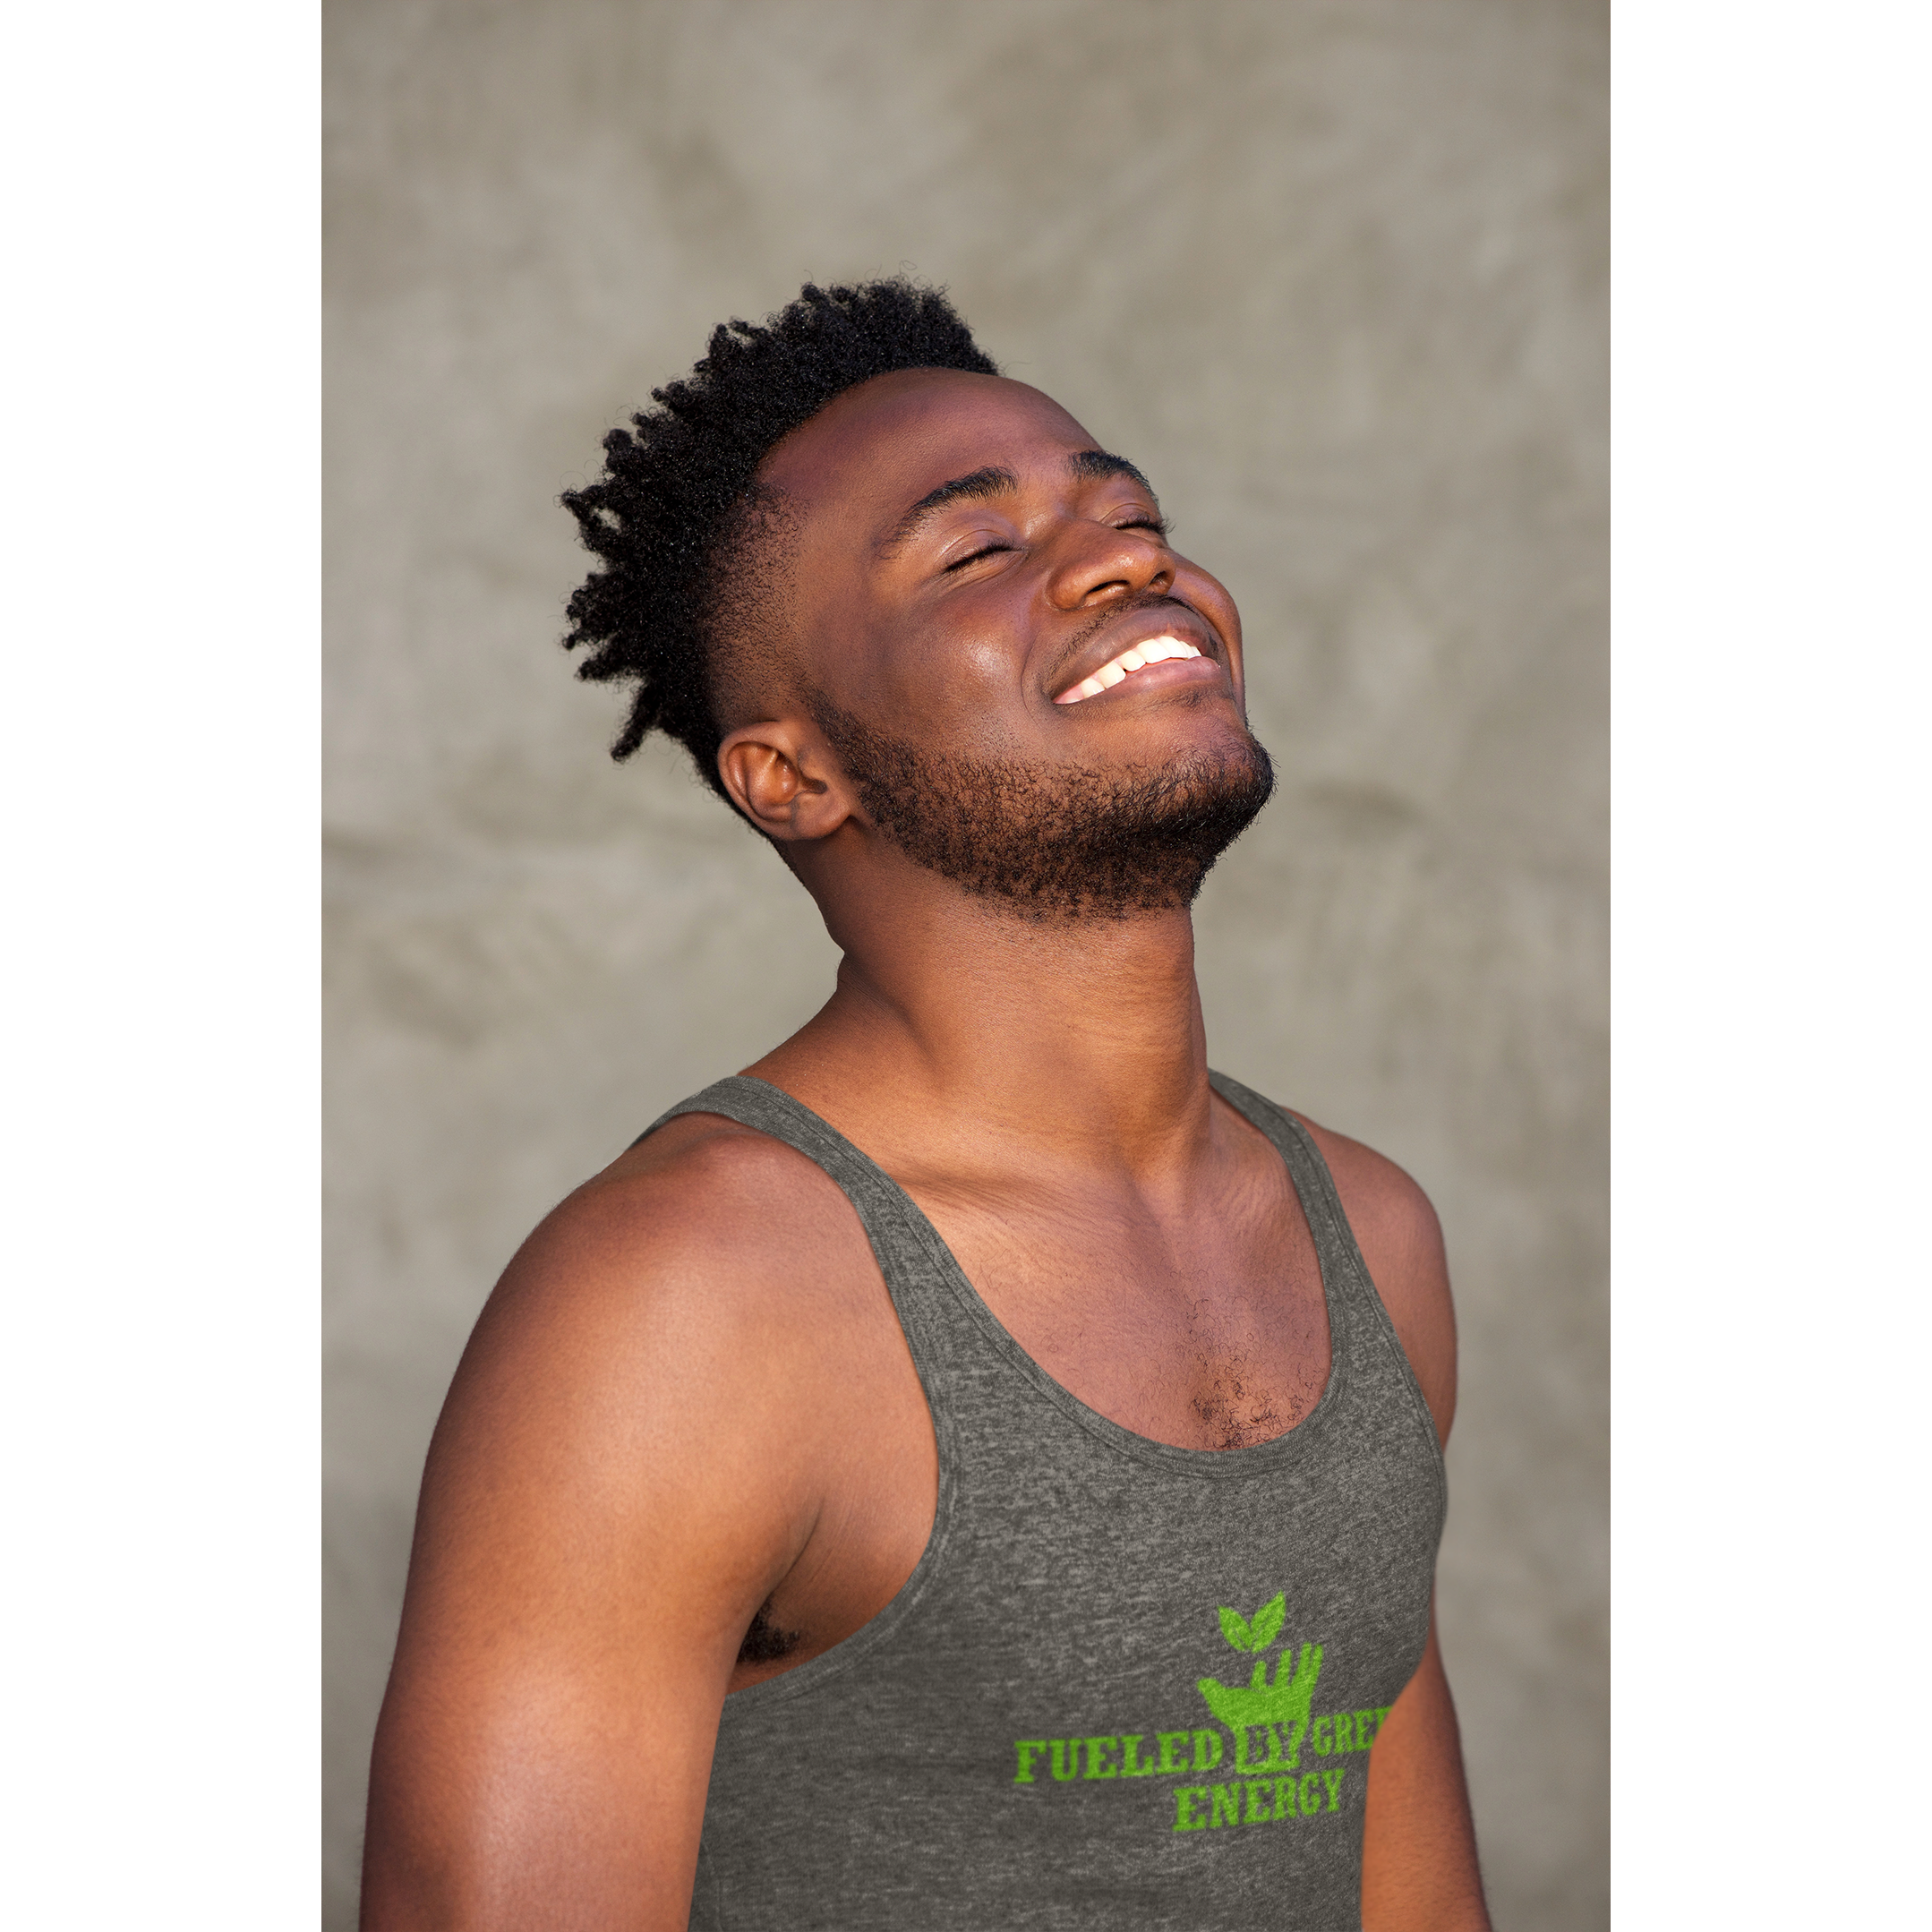 vegan tank top saying fueled by green energy worn by a smiling man